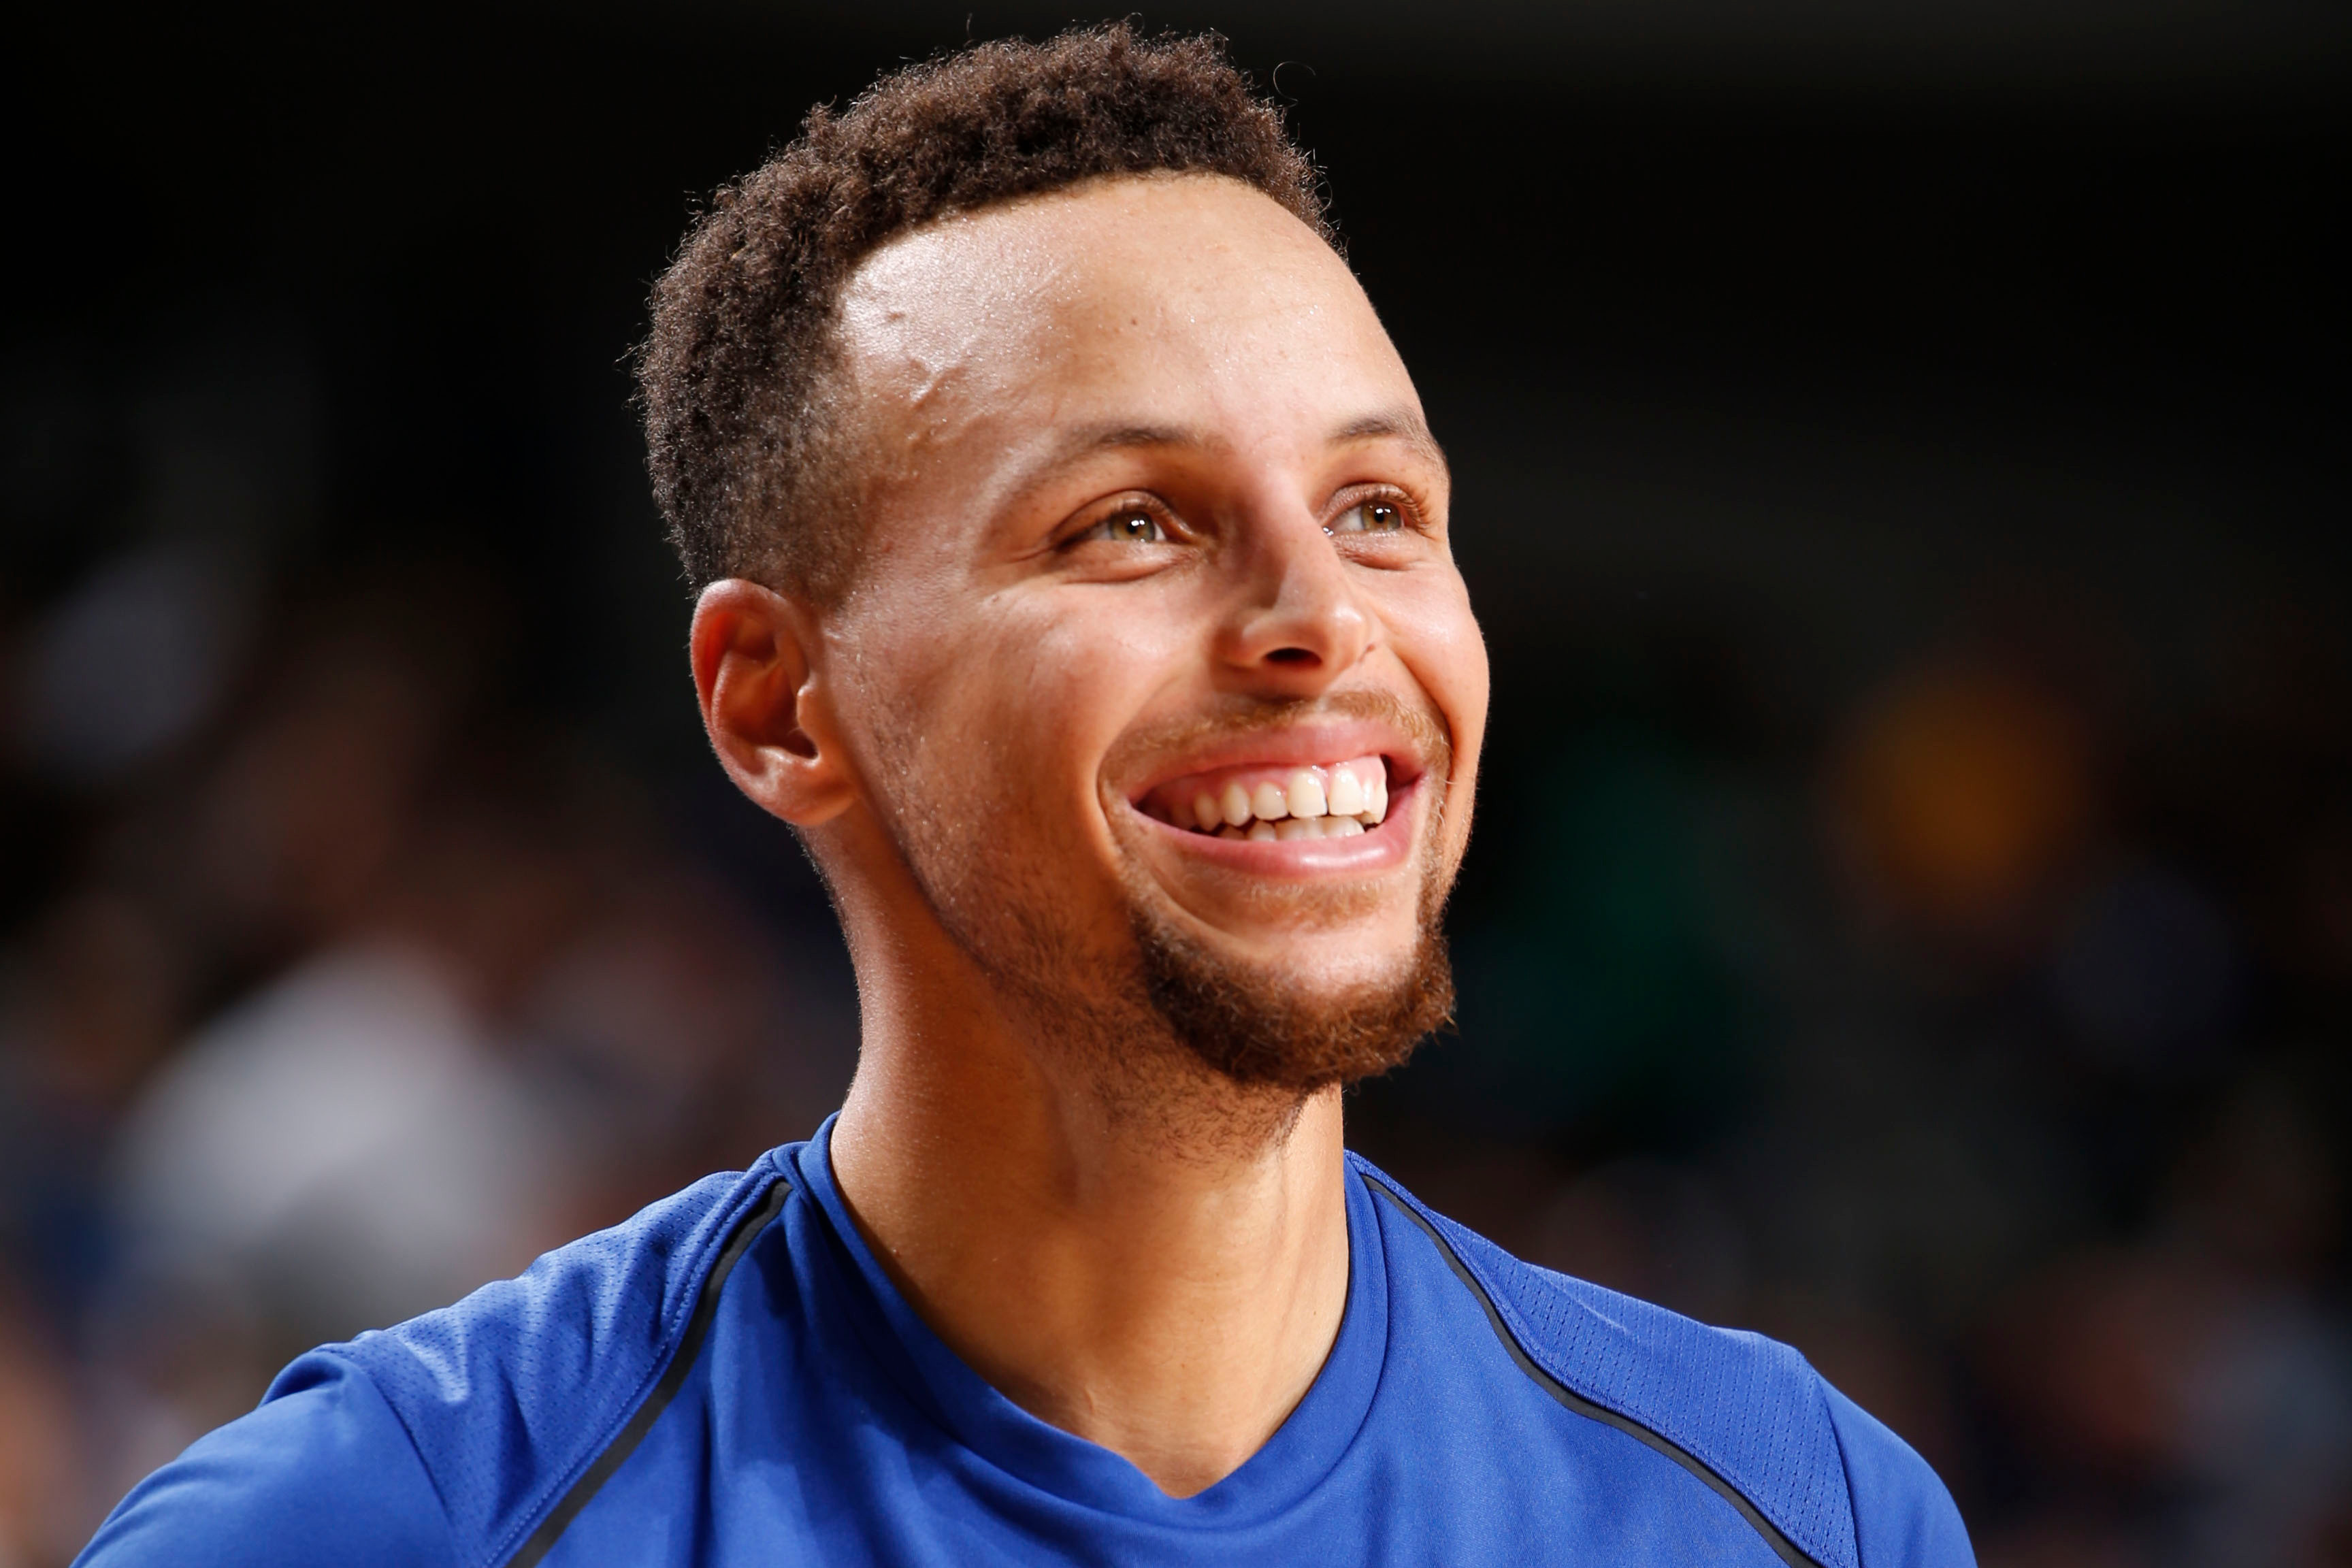 Steph Curry is a better human than you.